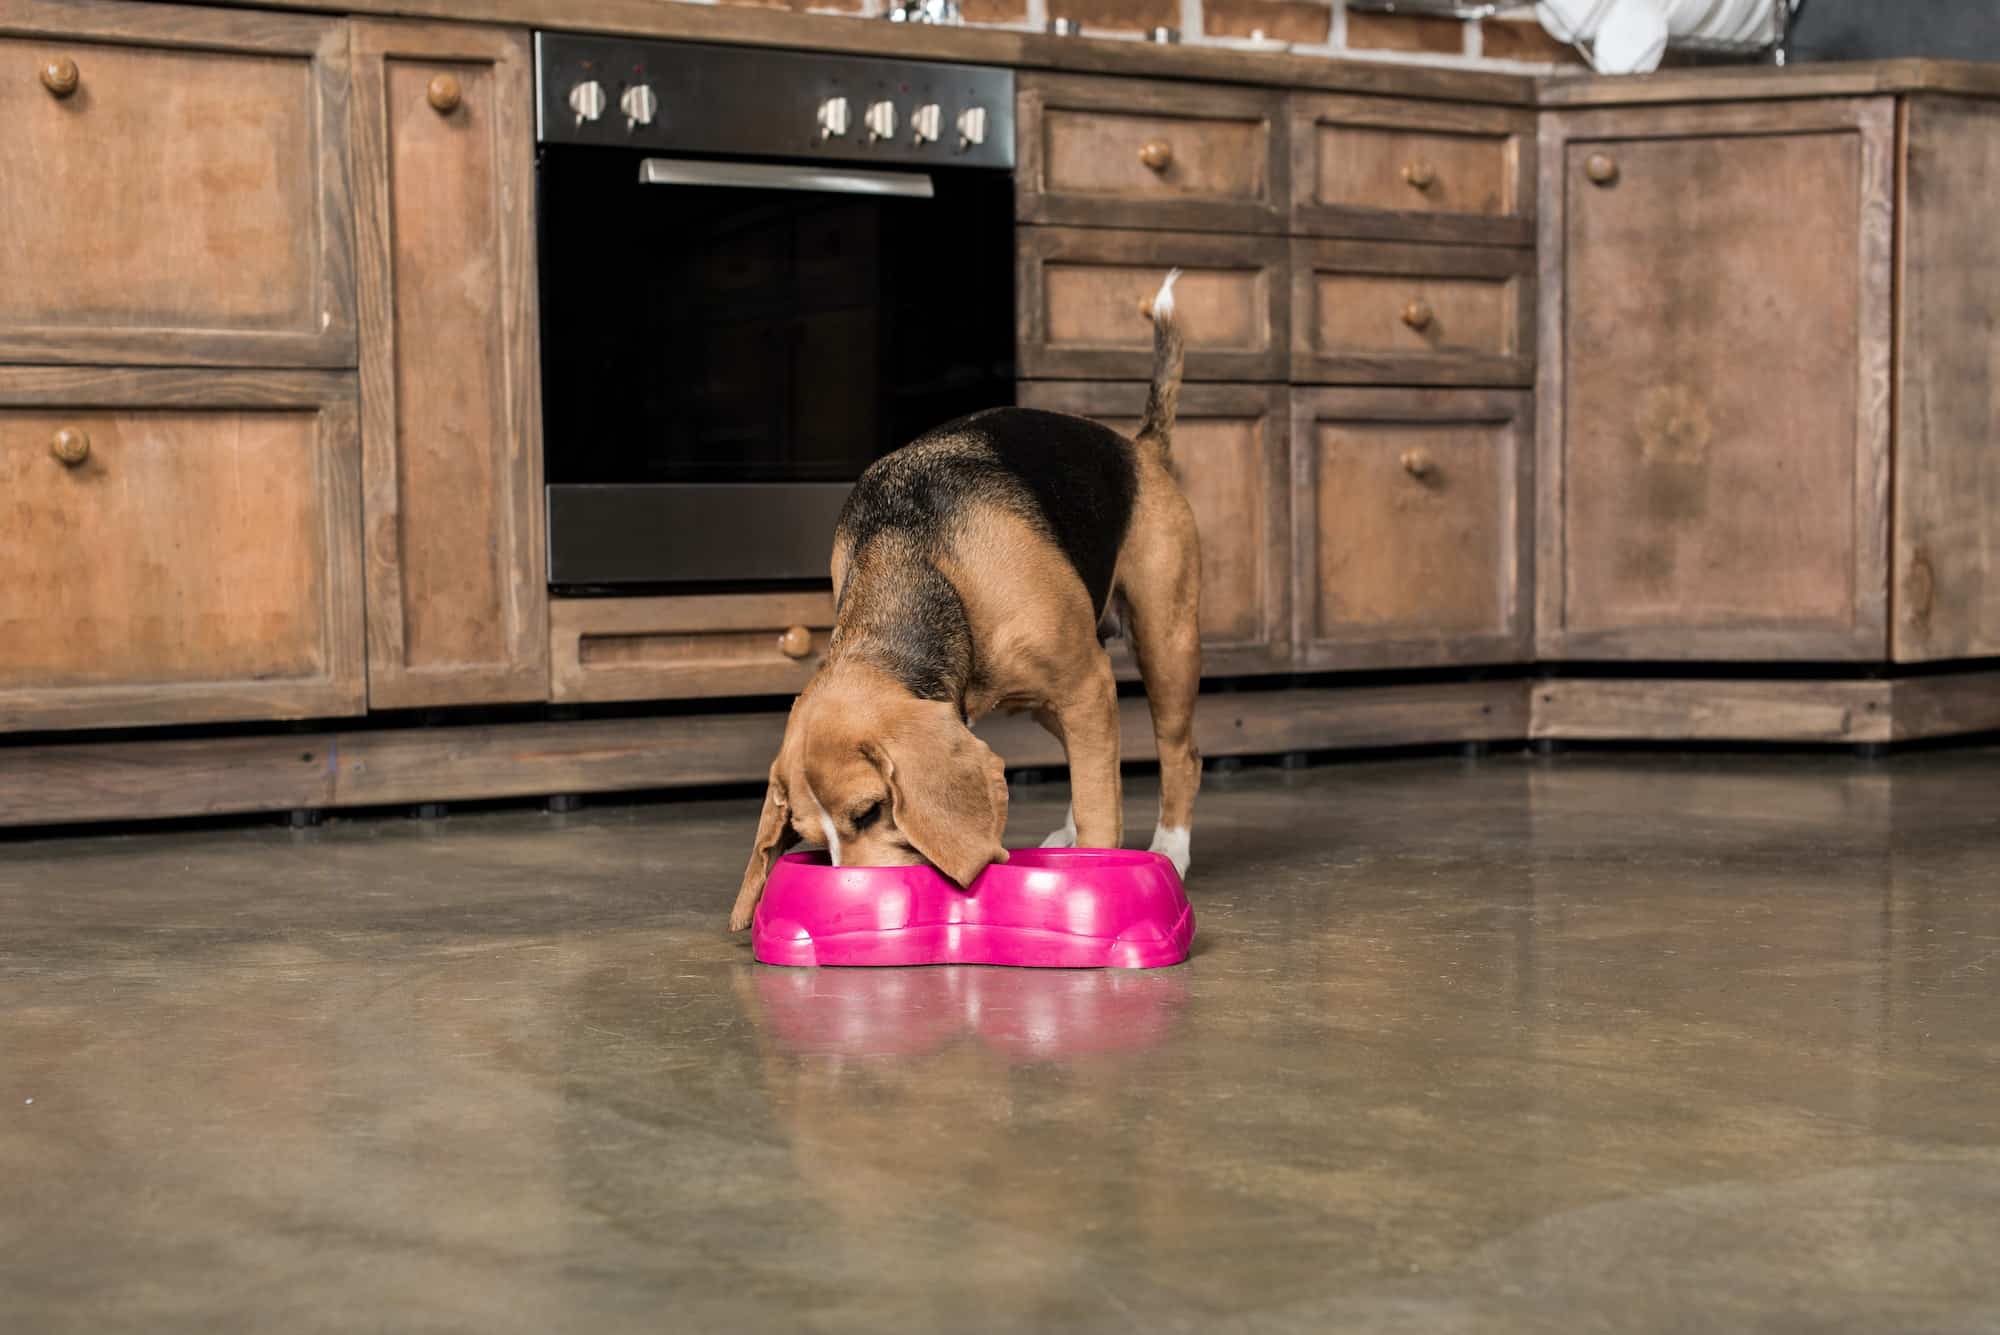 hungry beagle dog eating from pink bowls in the kitchen